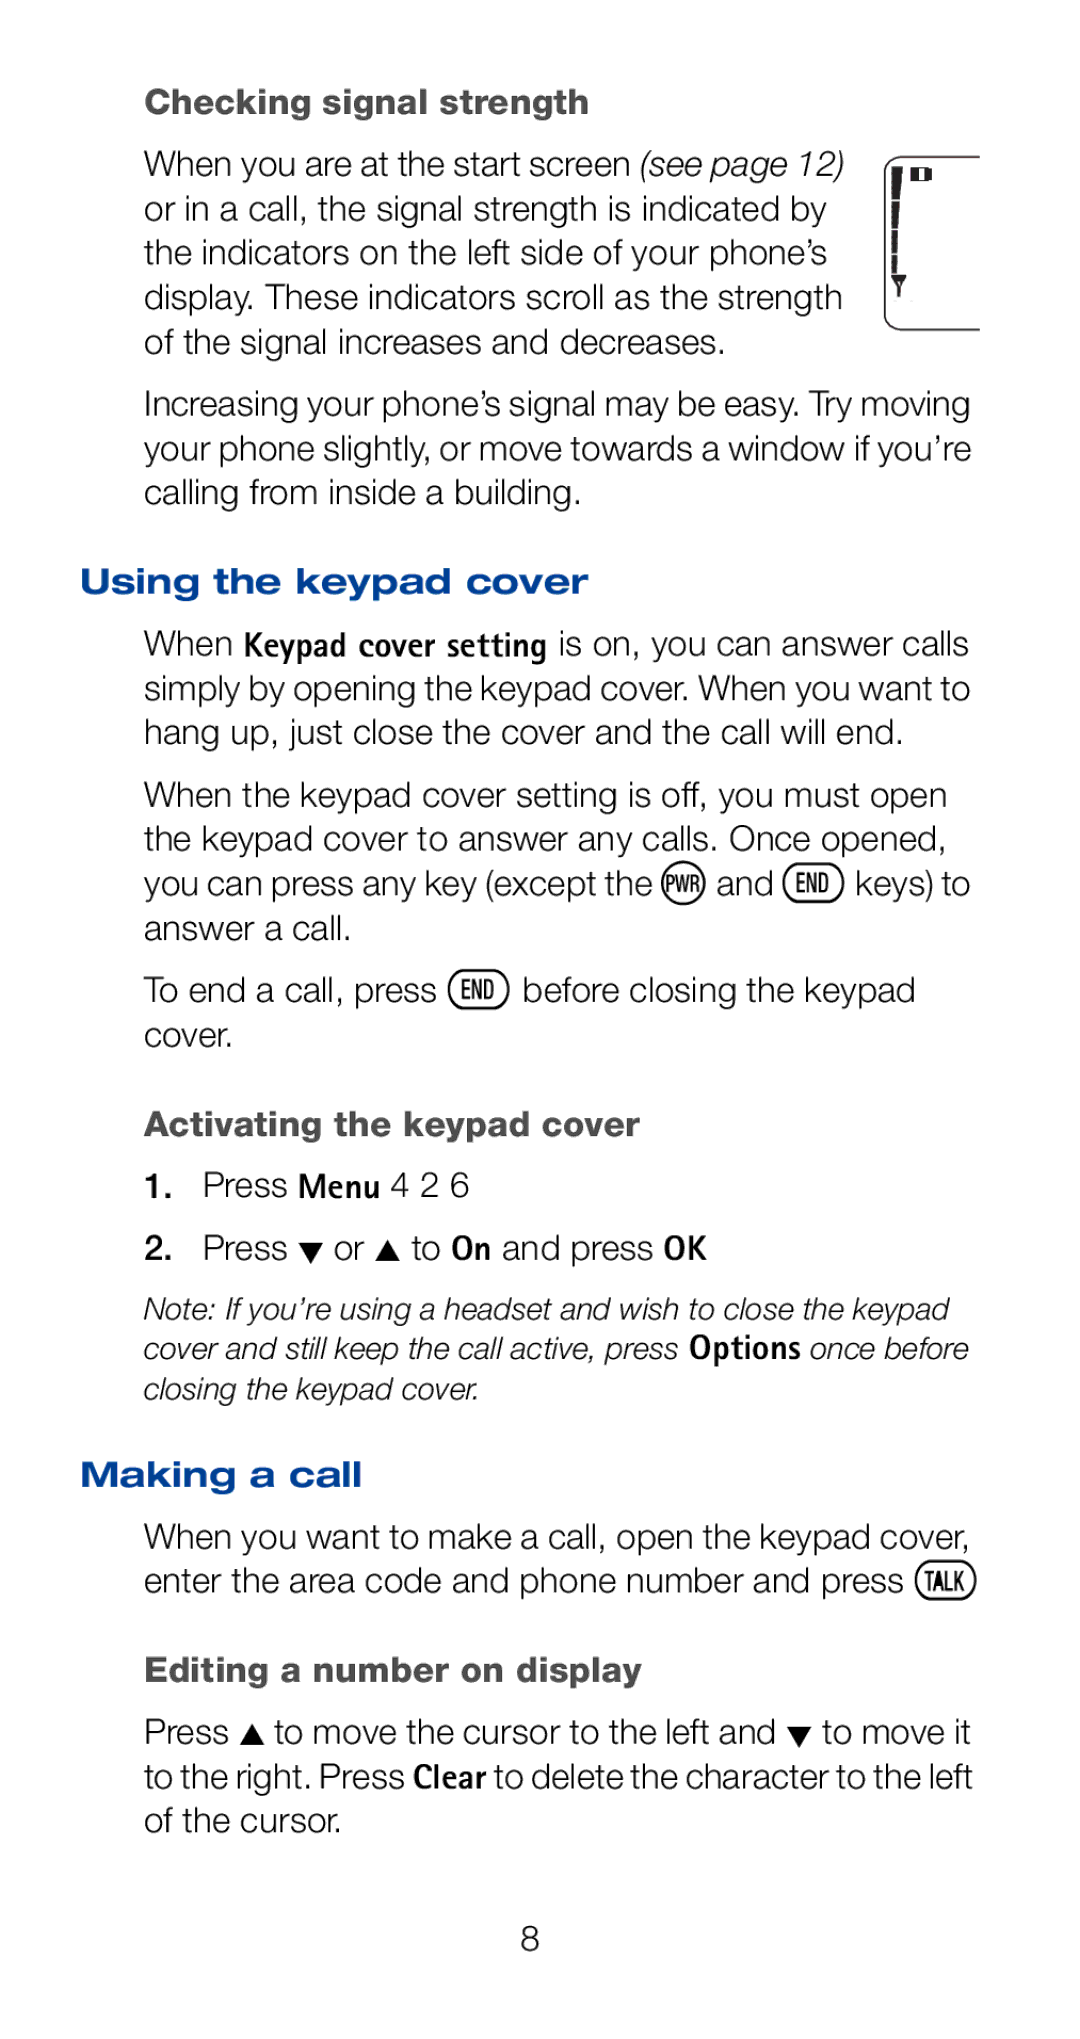 Nokia 6161i owner manual Checking signal strength, Using the keypad cover, Activating the keypad cover, Making a call 